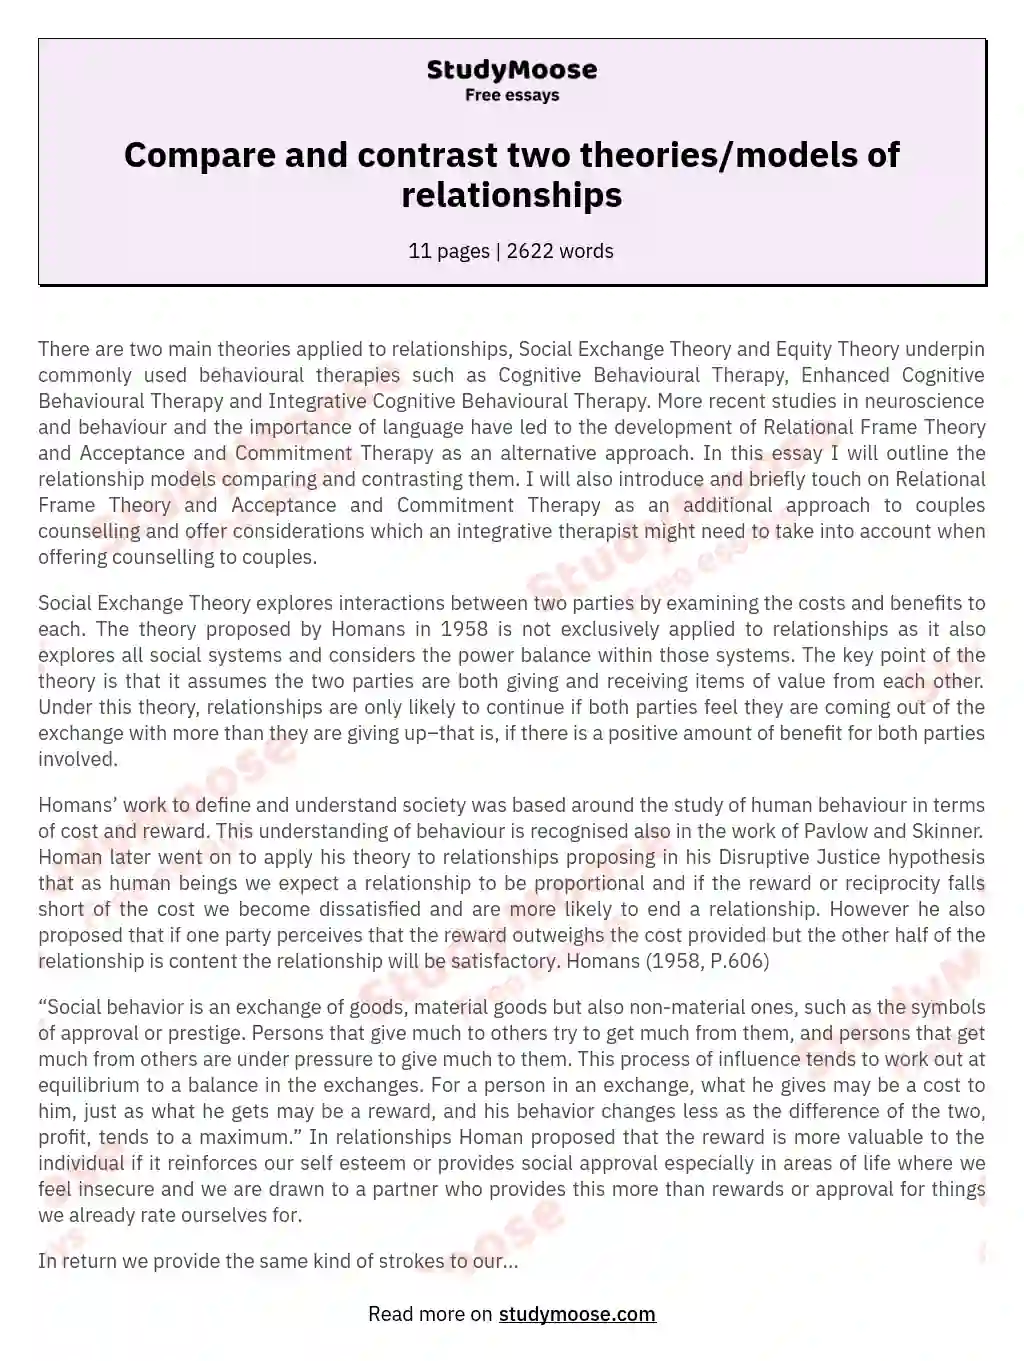 Compare and contrast two theories/models of relationships